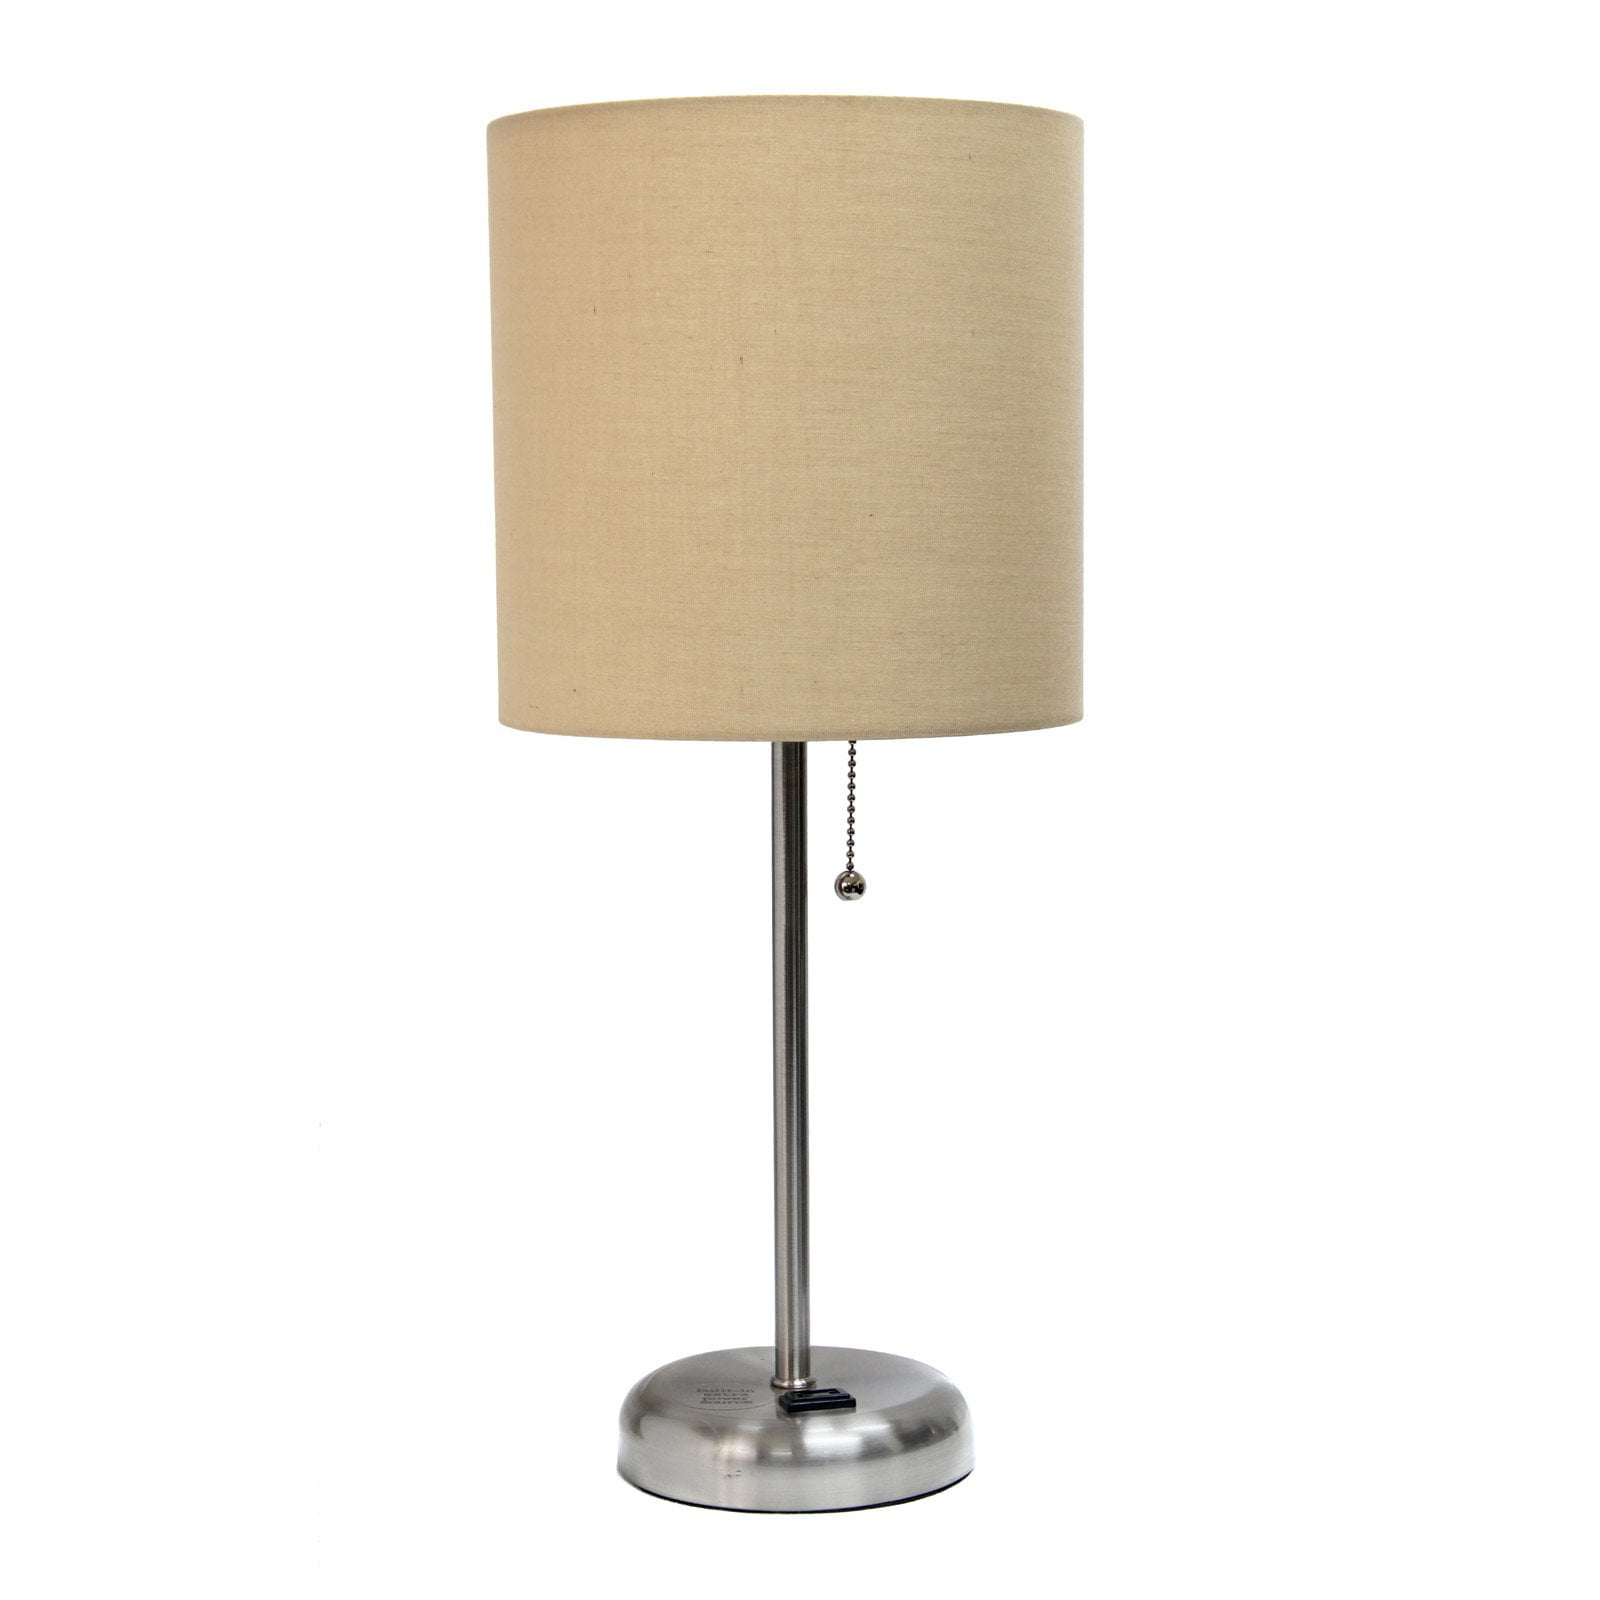 Lt2024-tan Stick Lamp With Charging Outlet & Fabric Shade, Tan